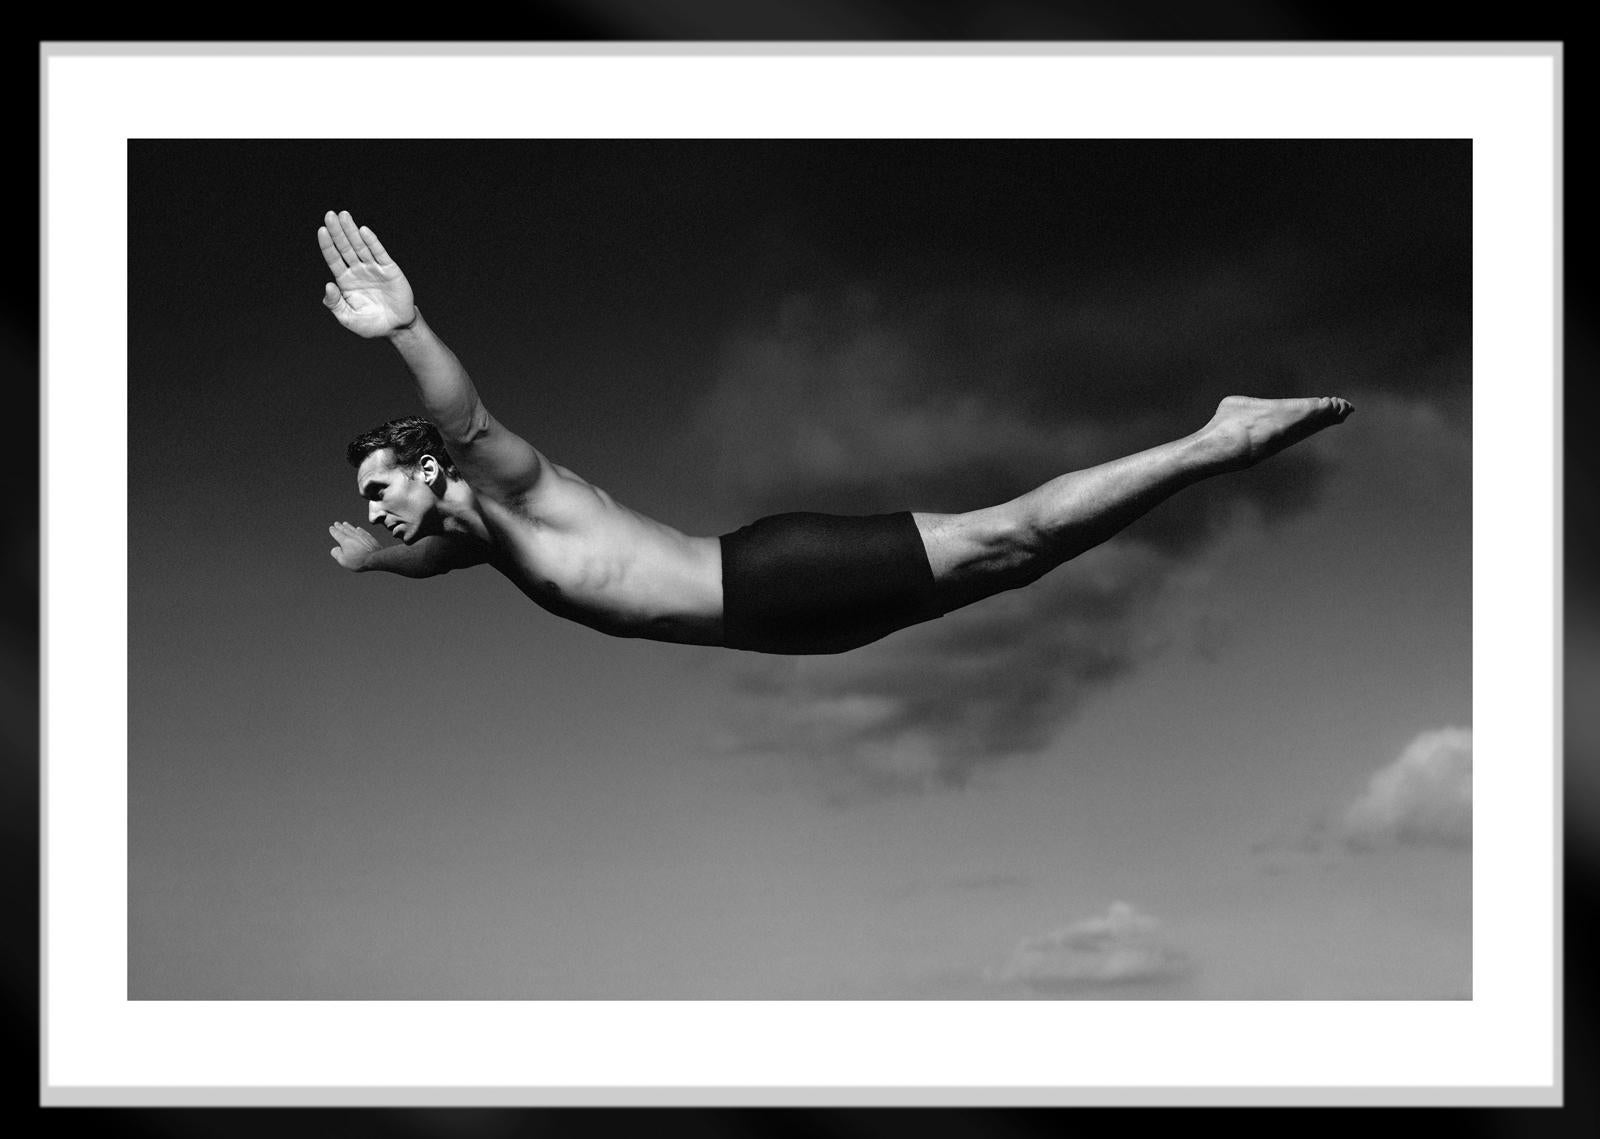 Diver - Signed limited edition fine art print, Black and white photo, Still life - Contemporary Photograph by Ian Sanderson